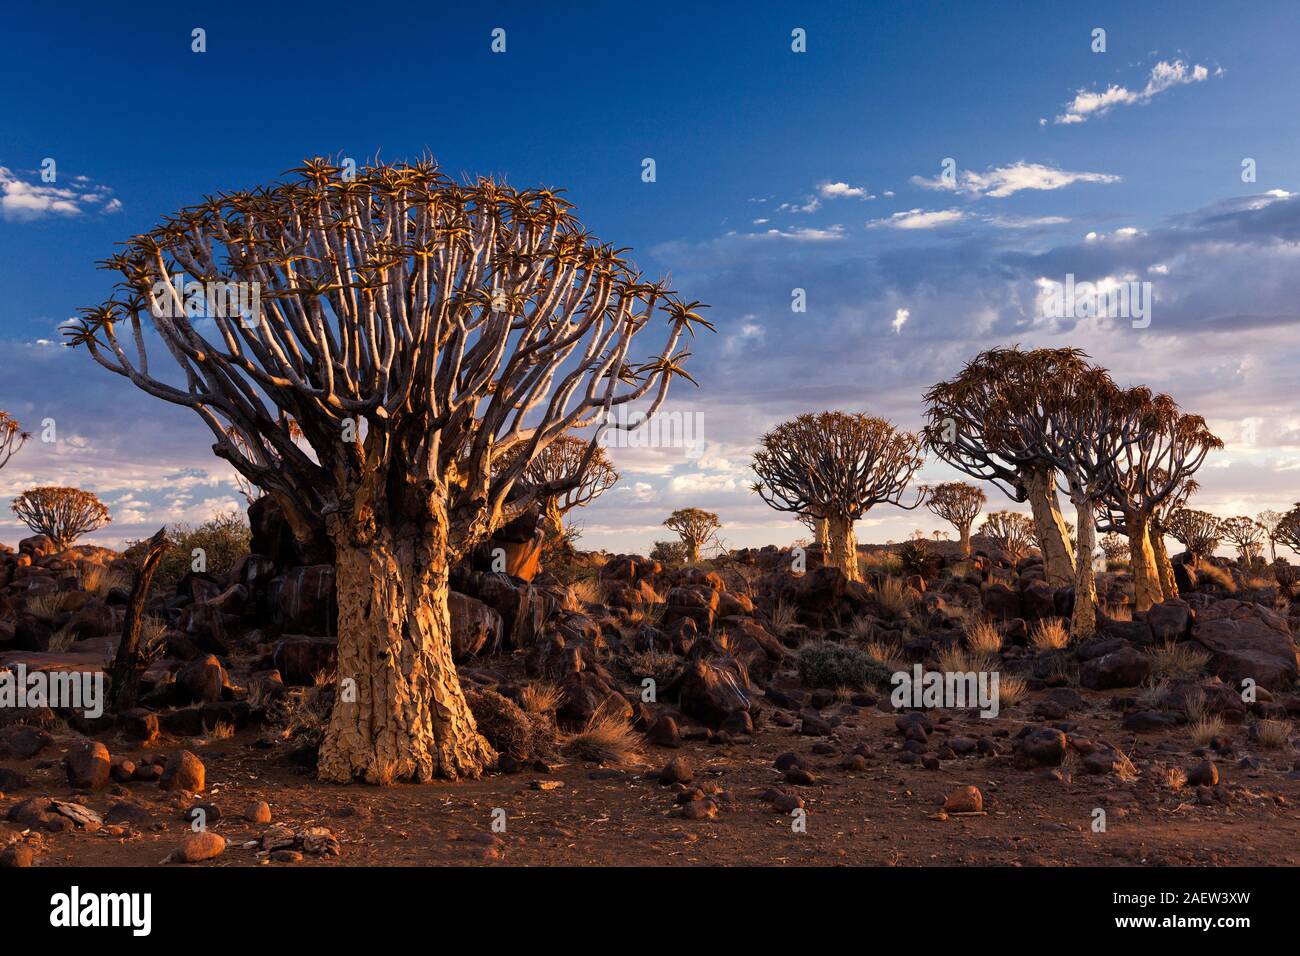 Quiver Tree Forest, Aloe dichotoma, early morning, Keetmanshoop, Karas Region, Namibia, Southern Africa, Africa Stock Photo